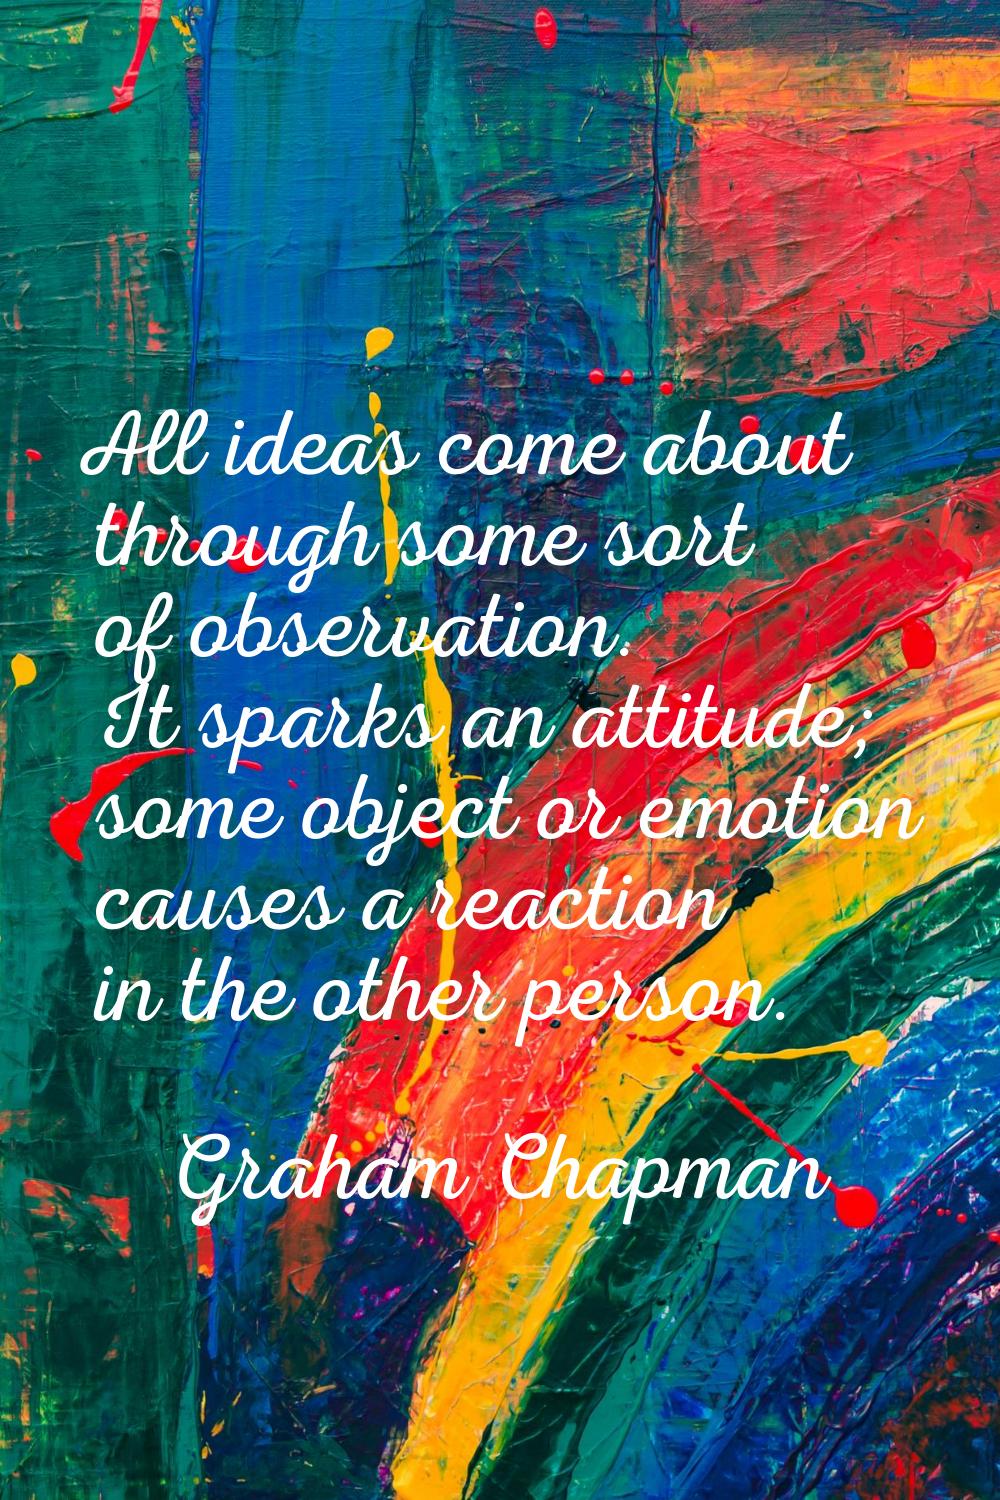 All ideas come about through some sort of observation. It sparks an attitude; some object or emotio